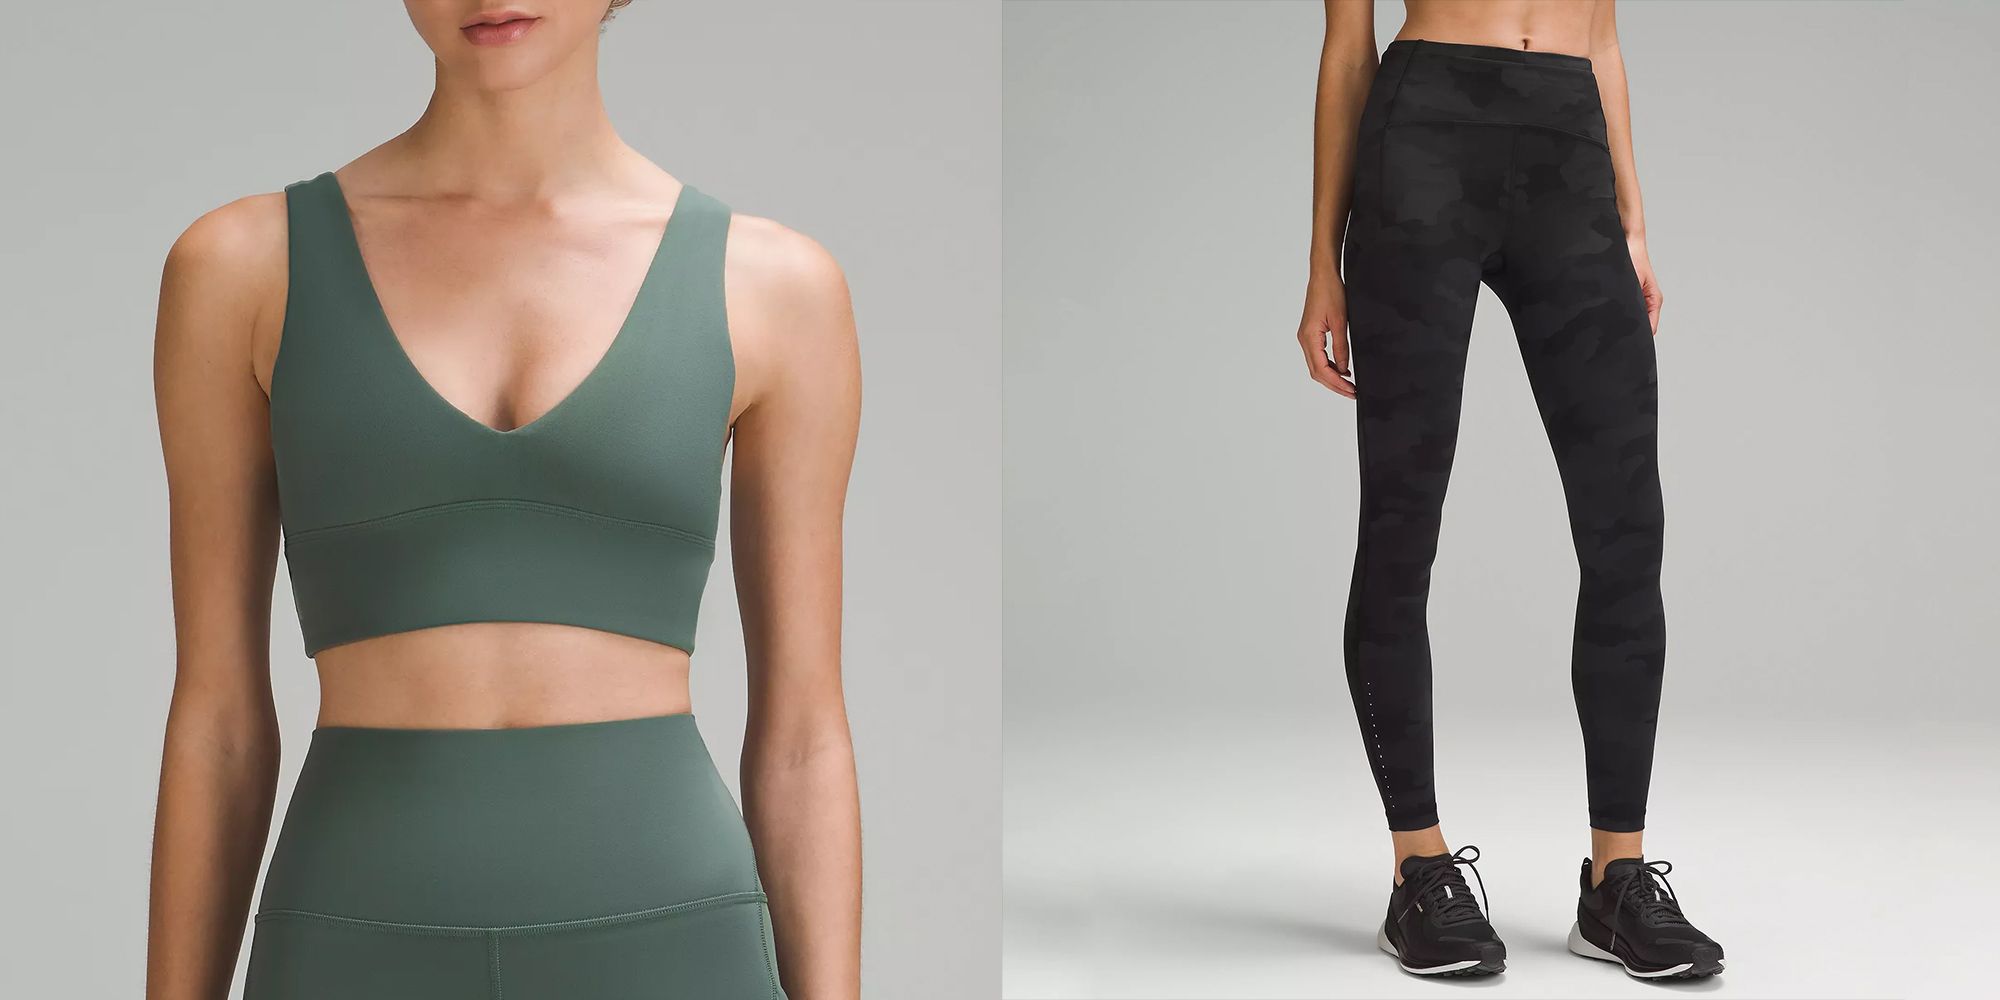 13 Best Finds From the Lululemon Labor Day Sale